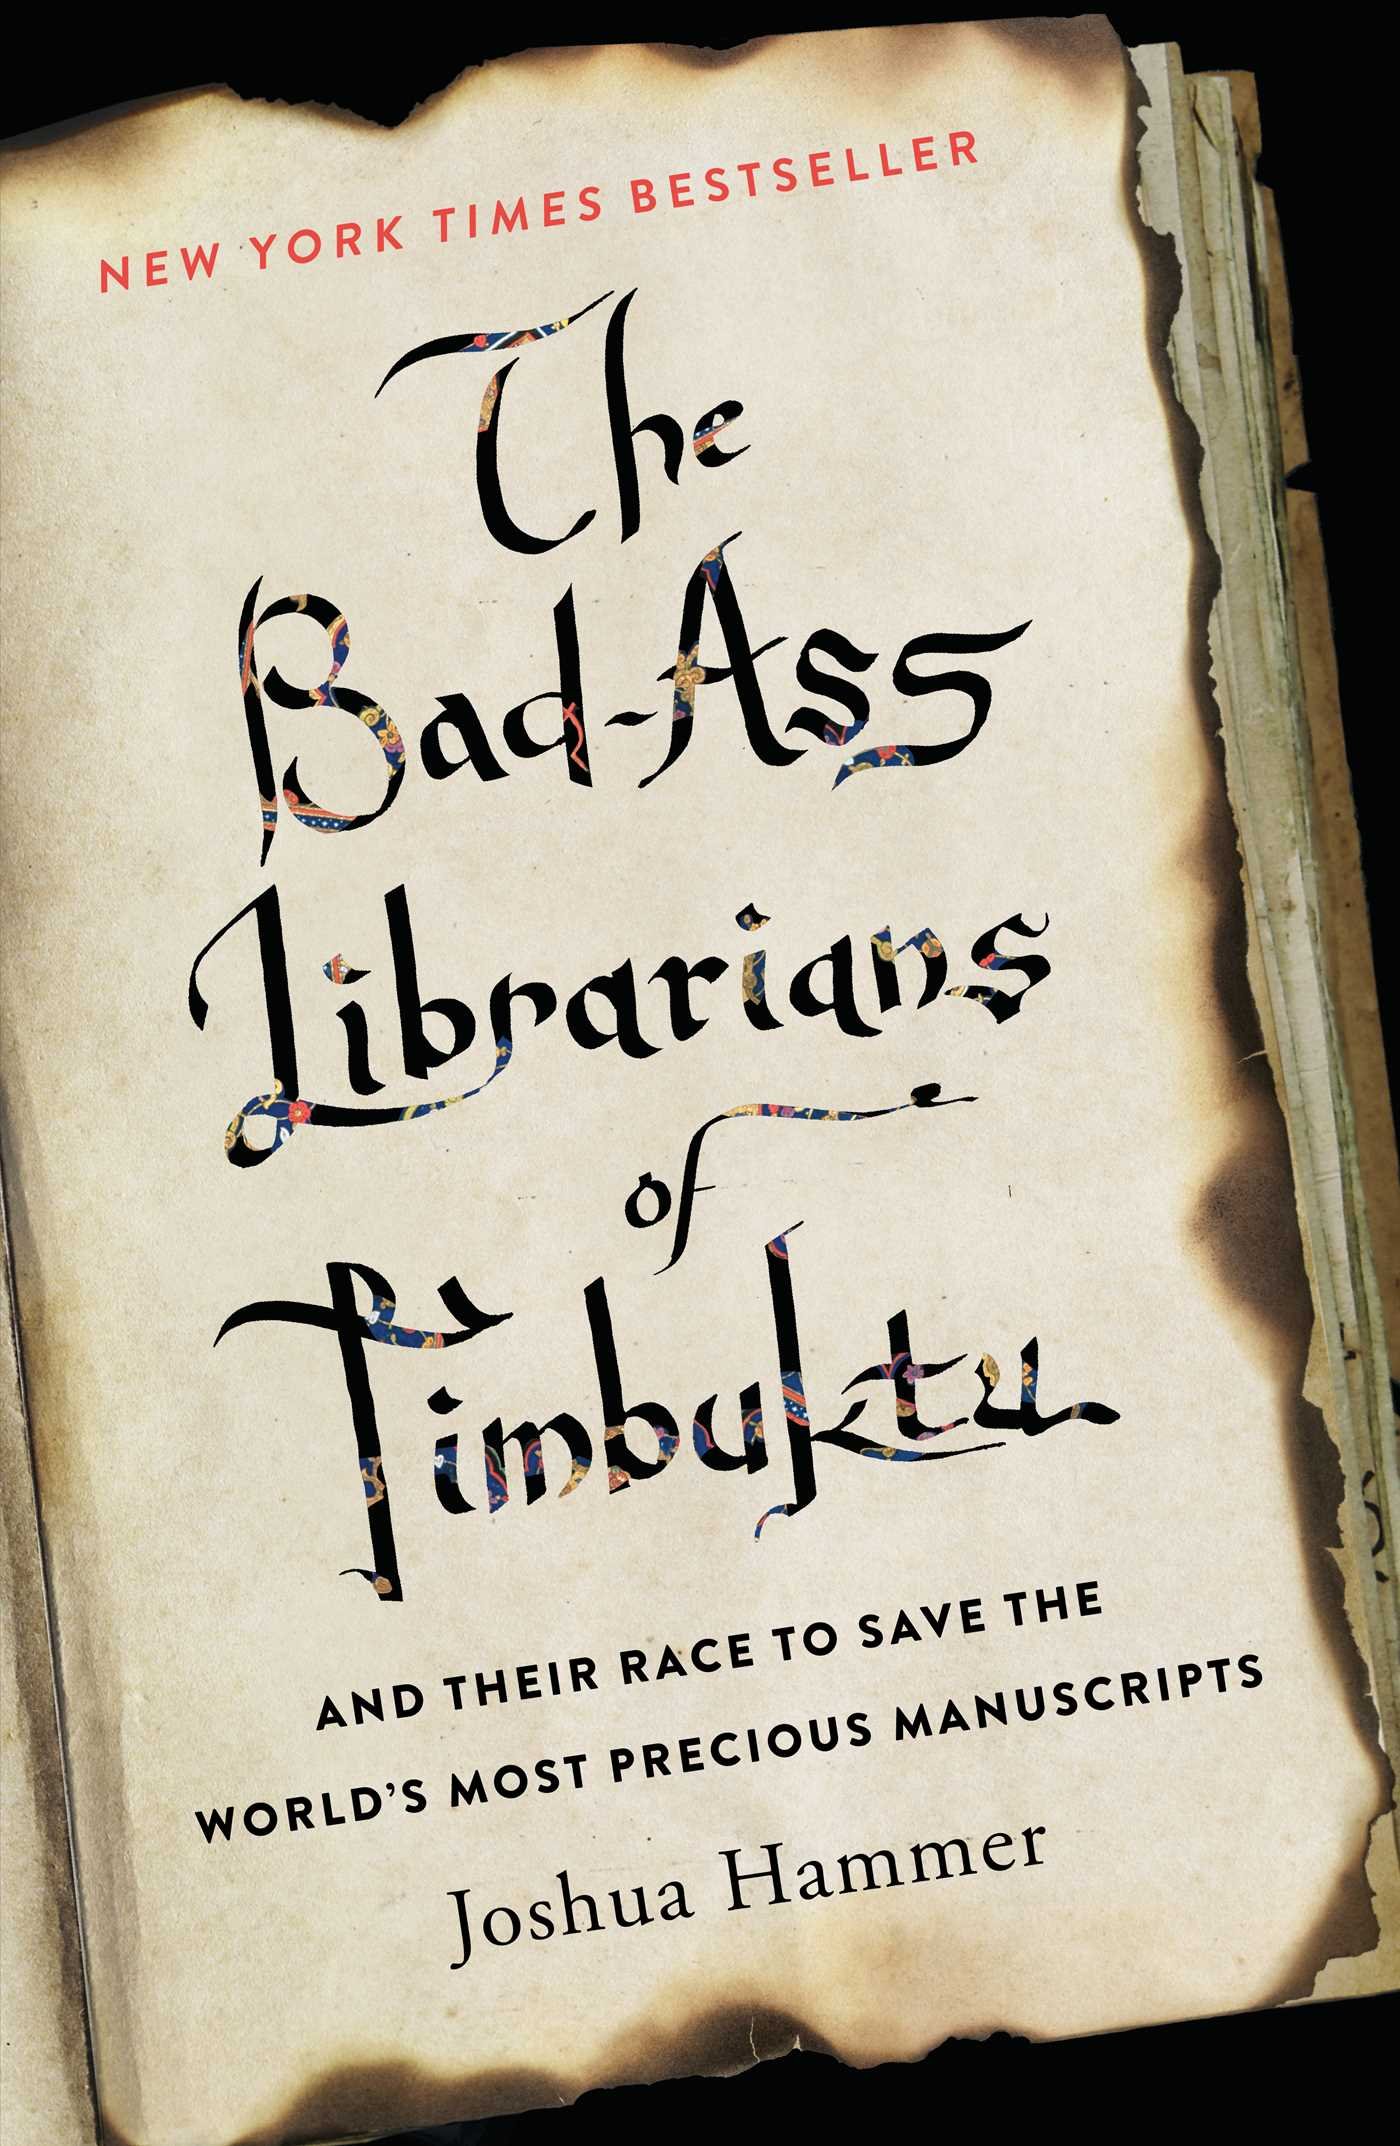 Book cover of "The Bad-Ass Librarians of Timbuktu," by Joshua Hammer